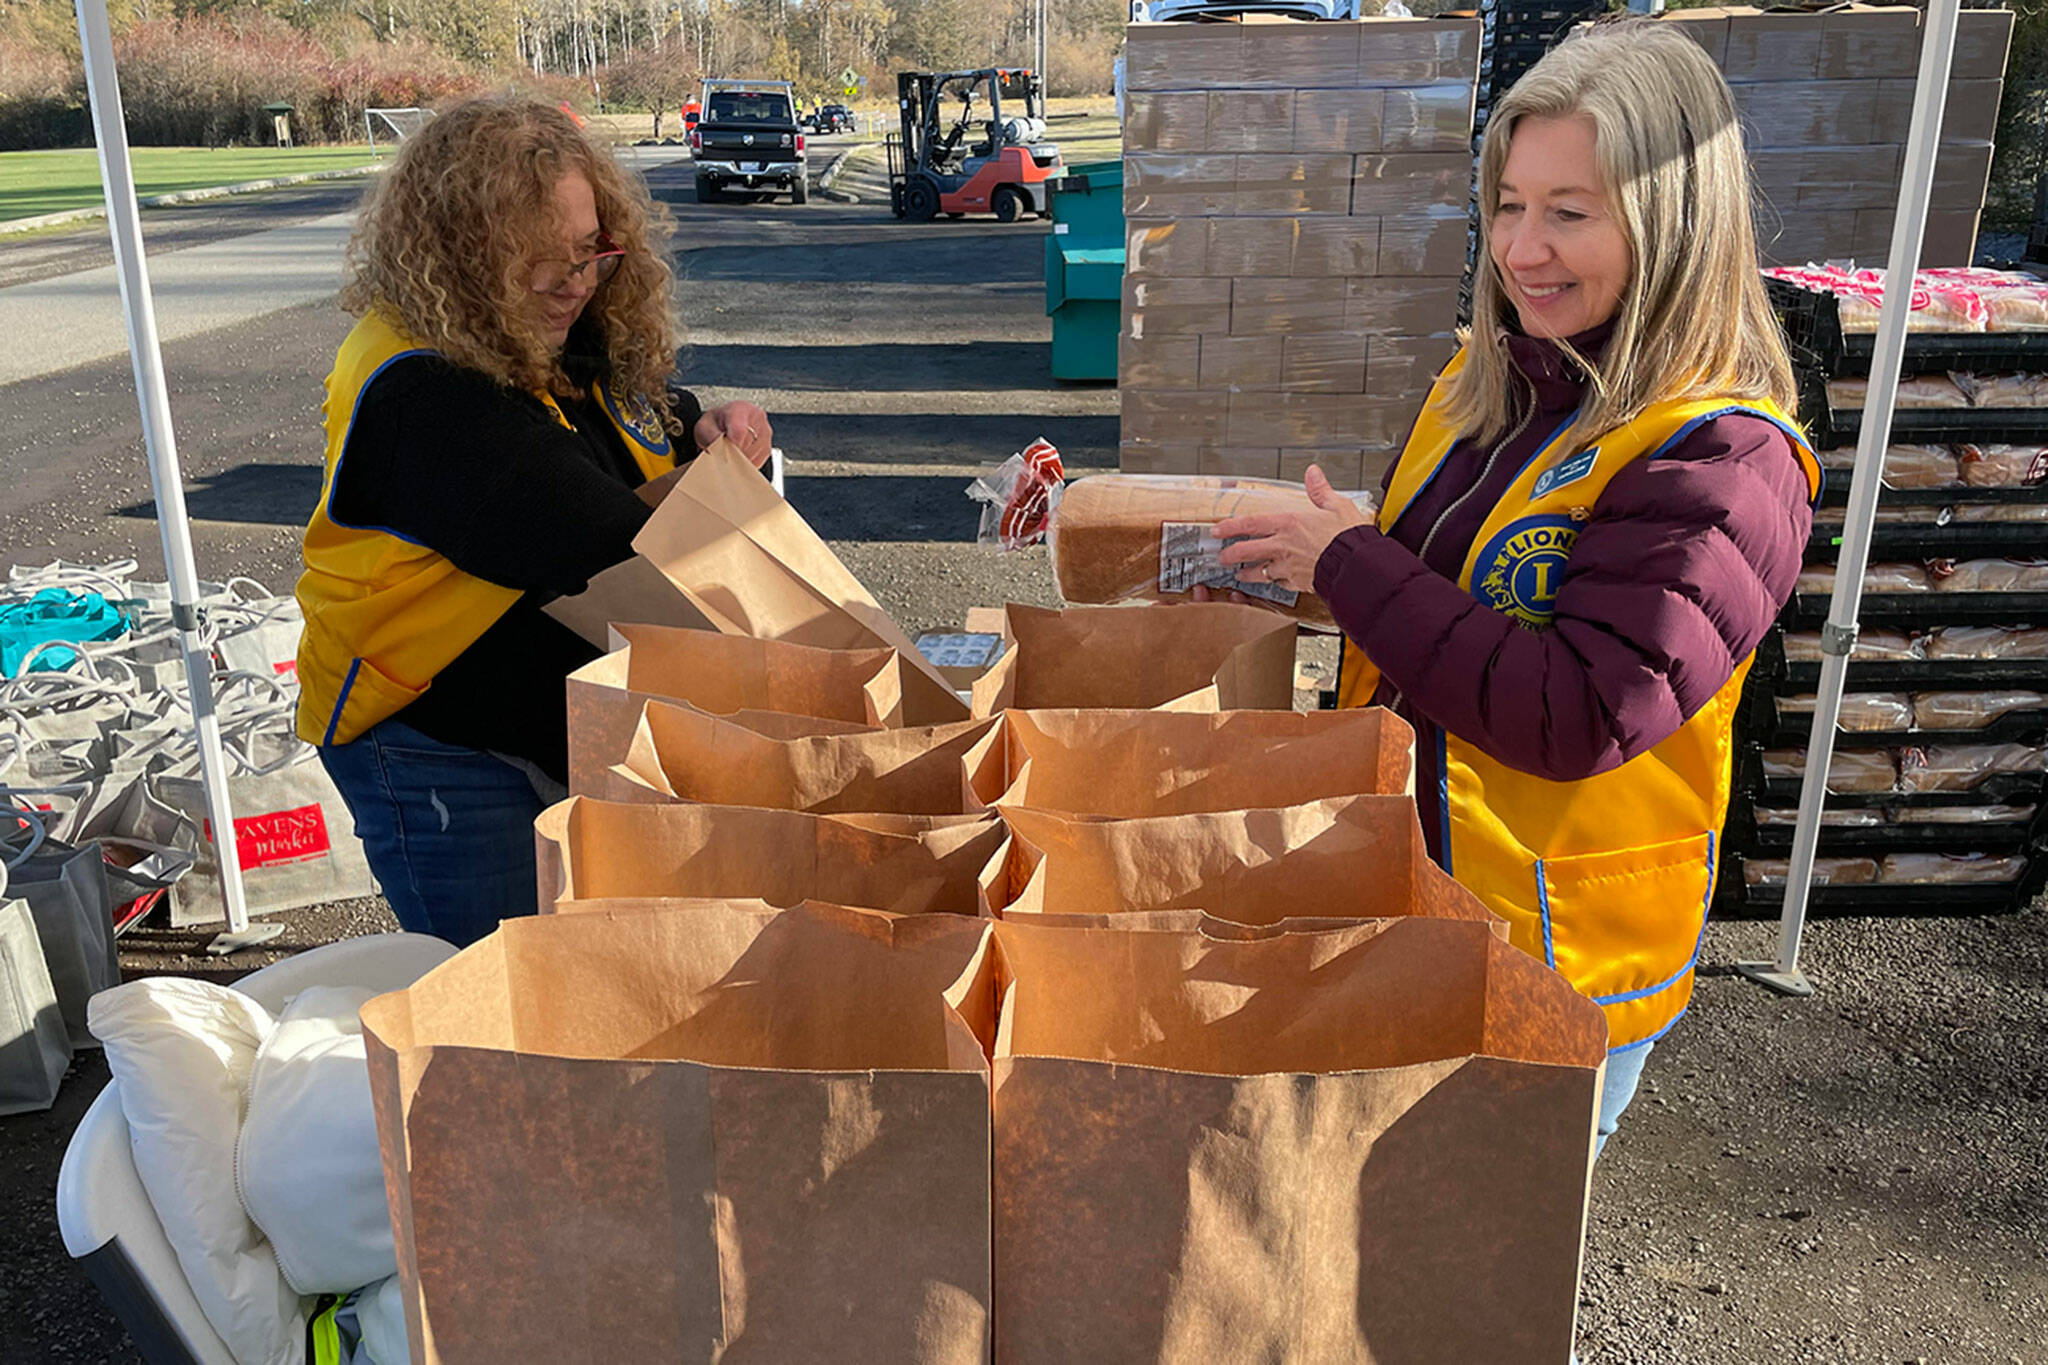 Sequim Gazette photo by Matthew Nash/ Denice Irish, on left Lou Ann Linder with the Sequim Valley Lions bag bread and other items for the Family Holiday Food Bag Distribution day on Nov. 18 in Carrie Blake Community Park.